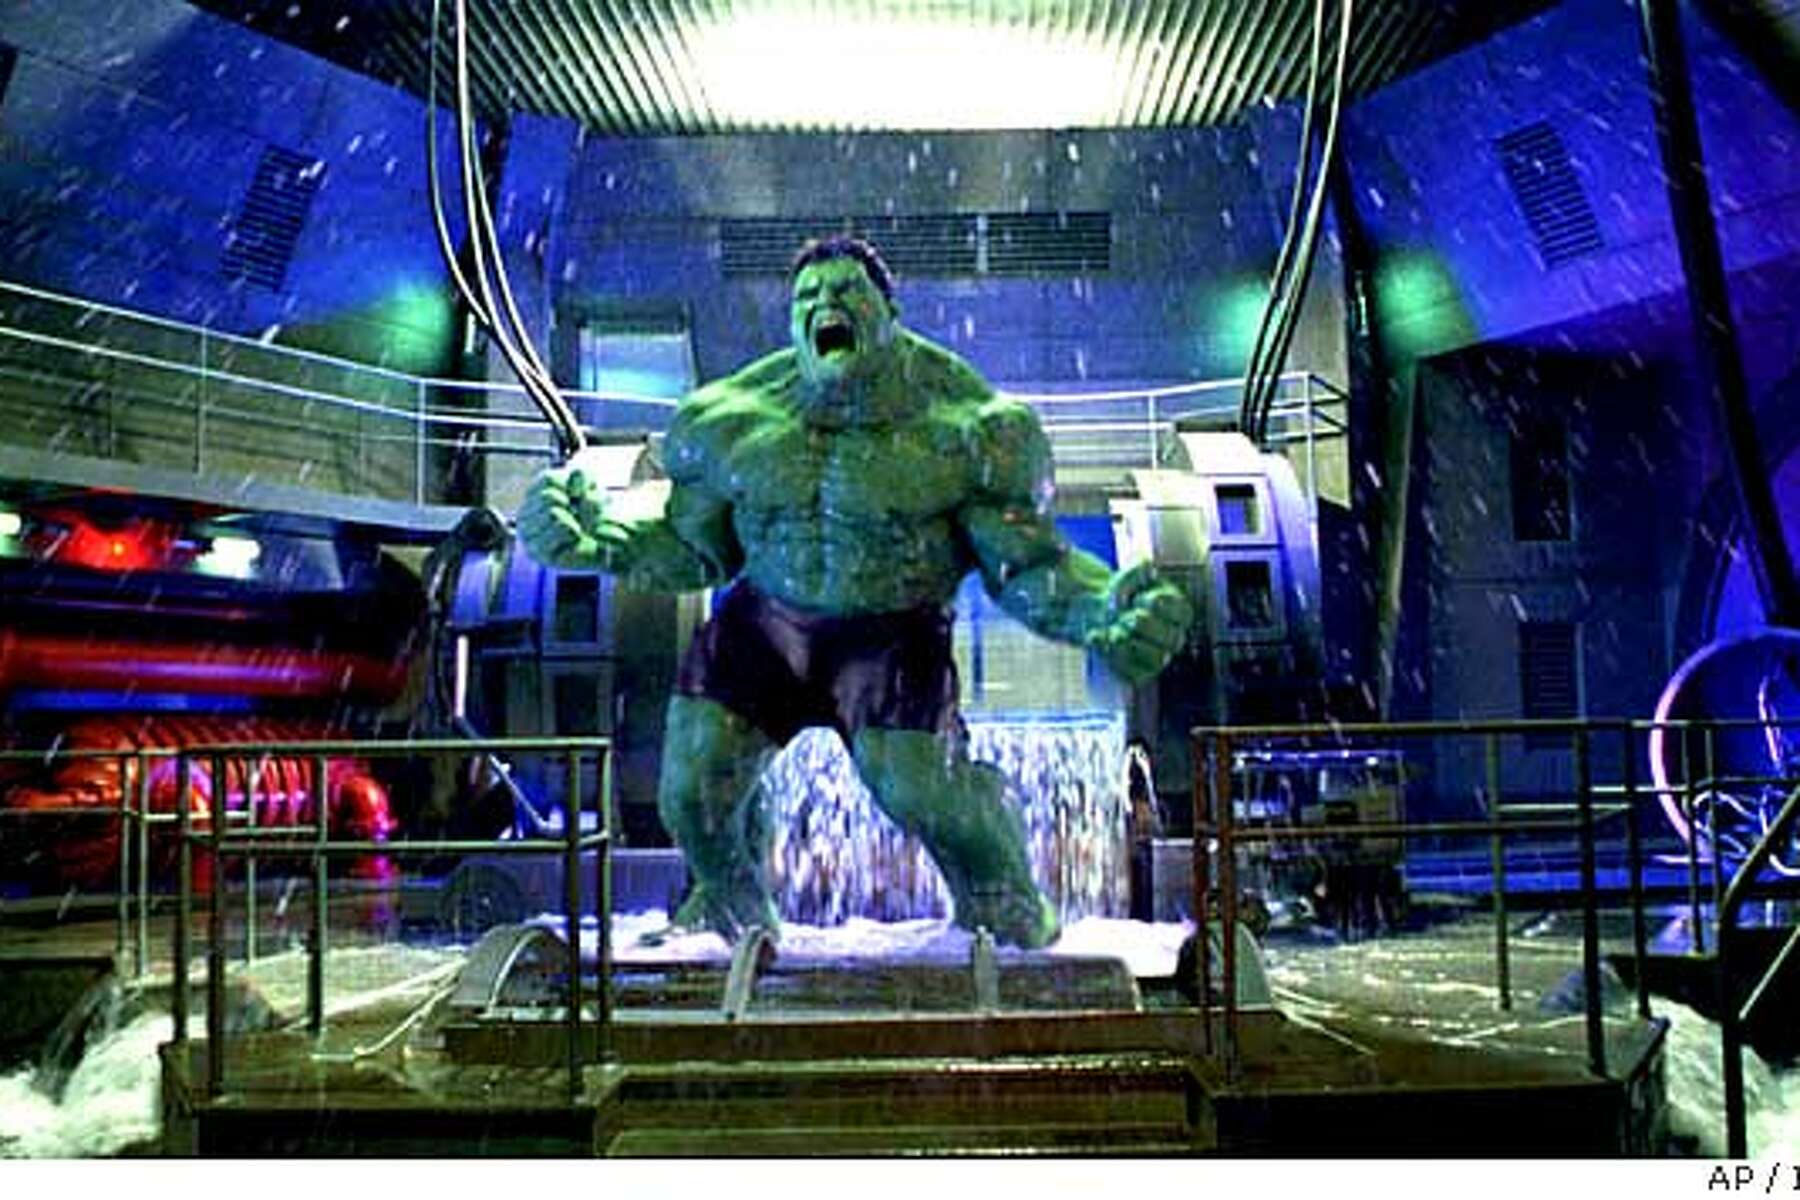 BEAUTY OF A BEAST / Ang Lee's 'Hulk' Is Graceful And Personal But, In The End, Just A Smash 'em Up Blockbuster